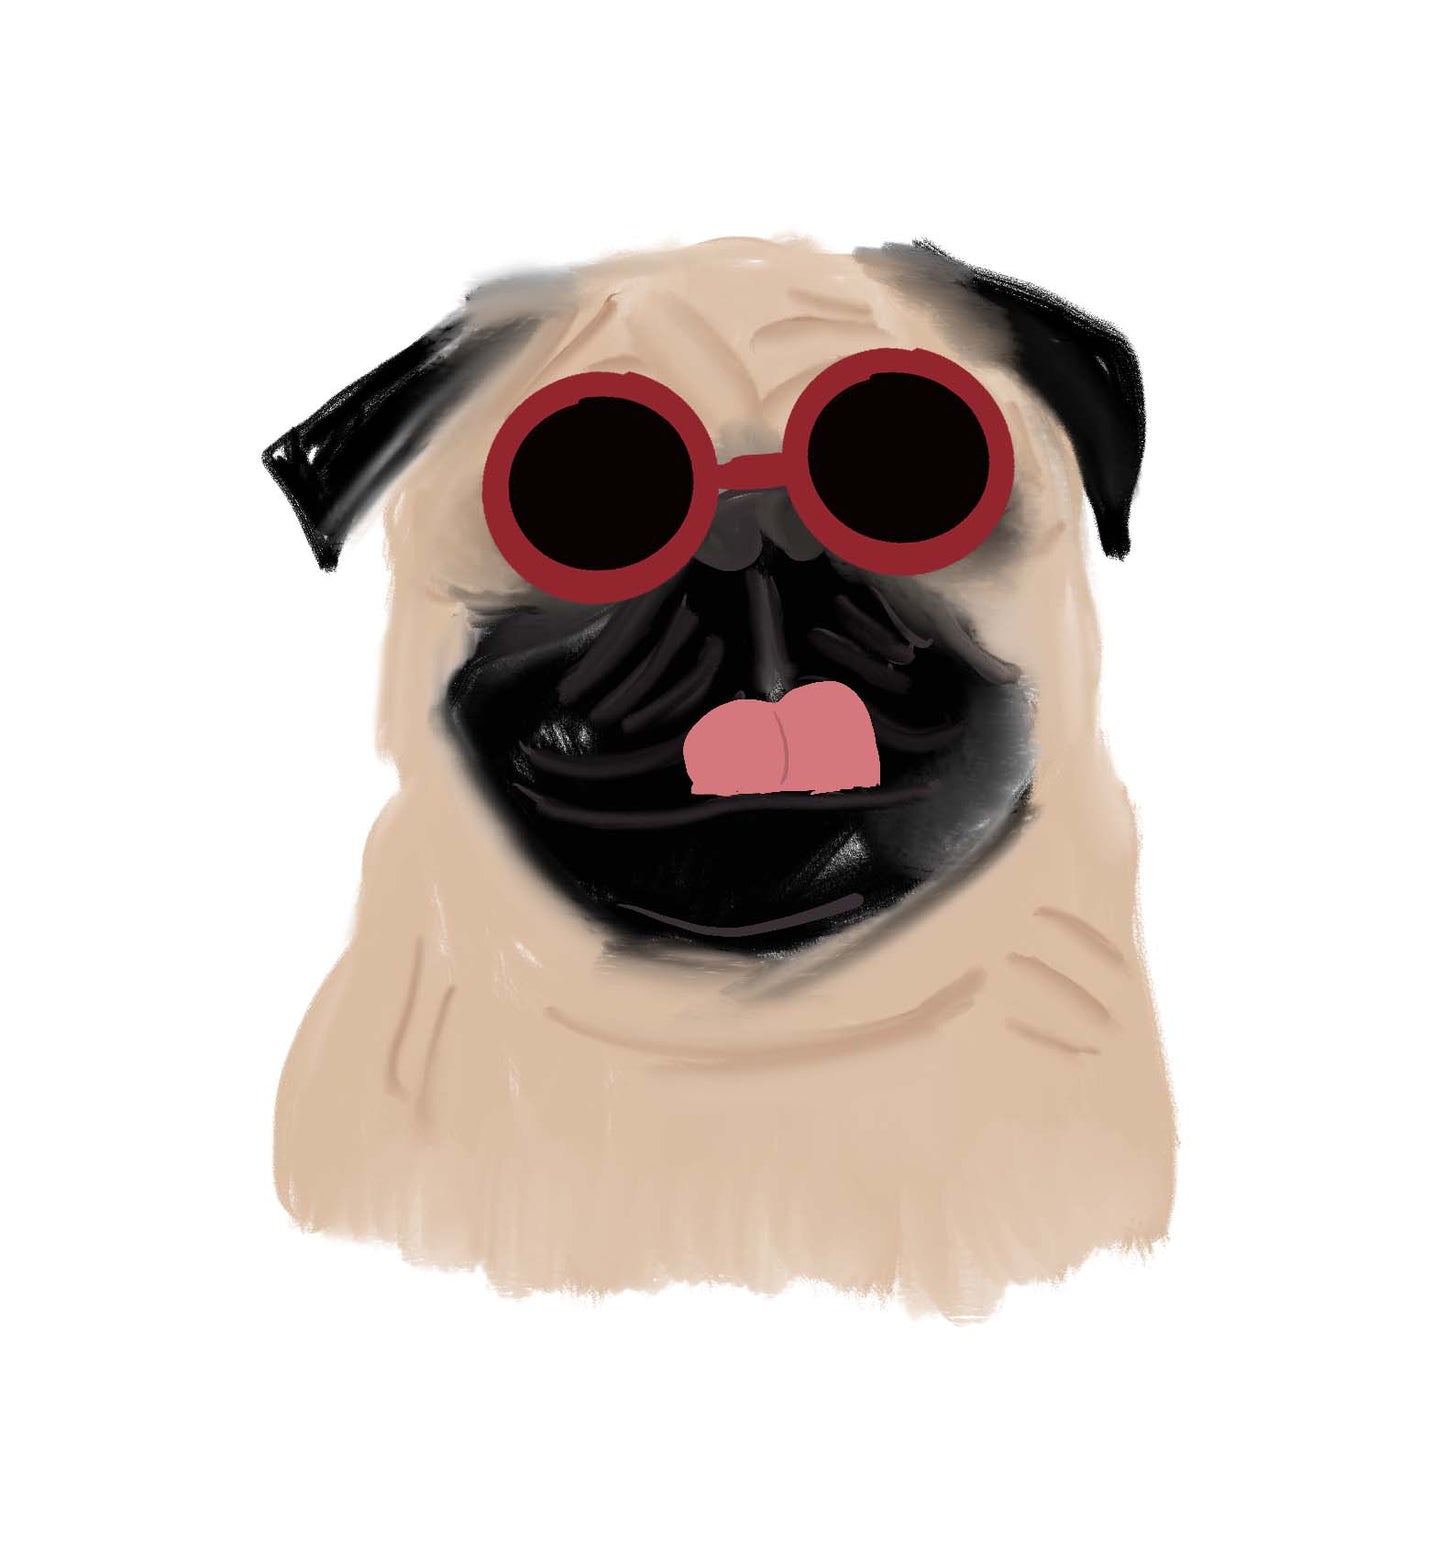 personalised Pug note card for your greetings